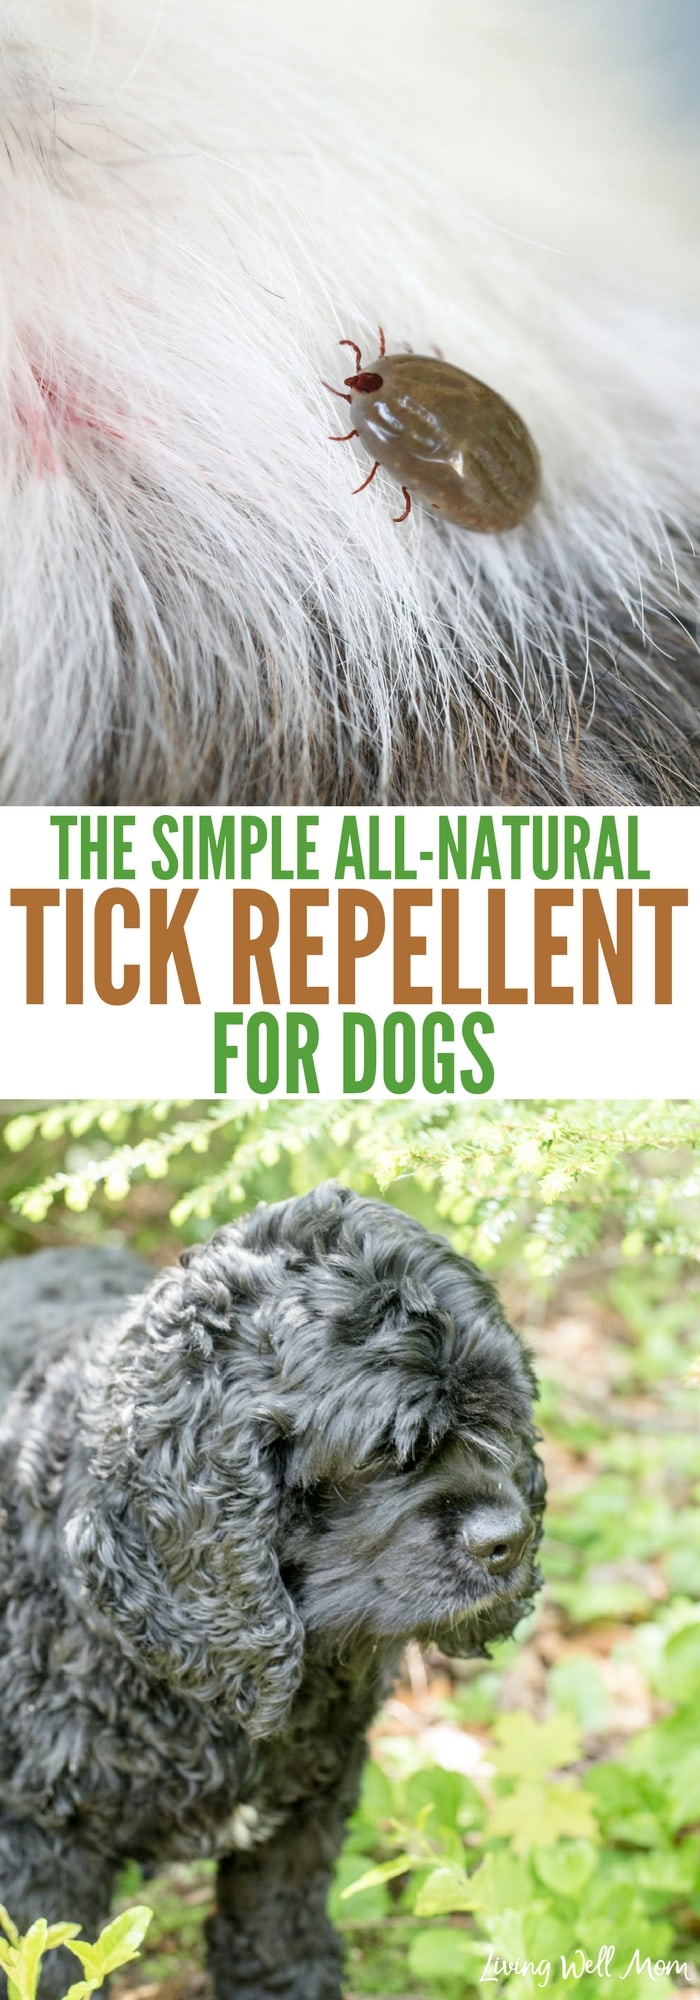 photo collection all natural tick repellent for dogs